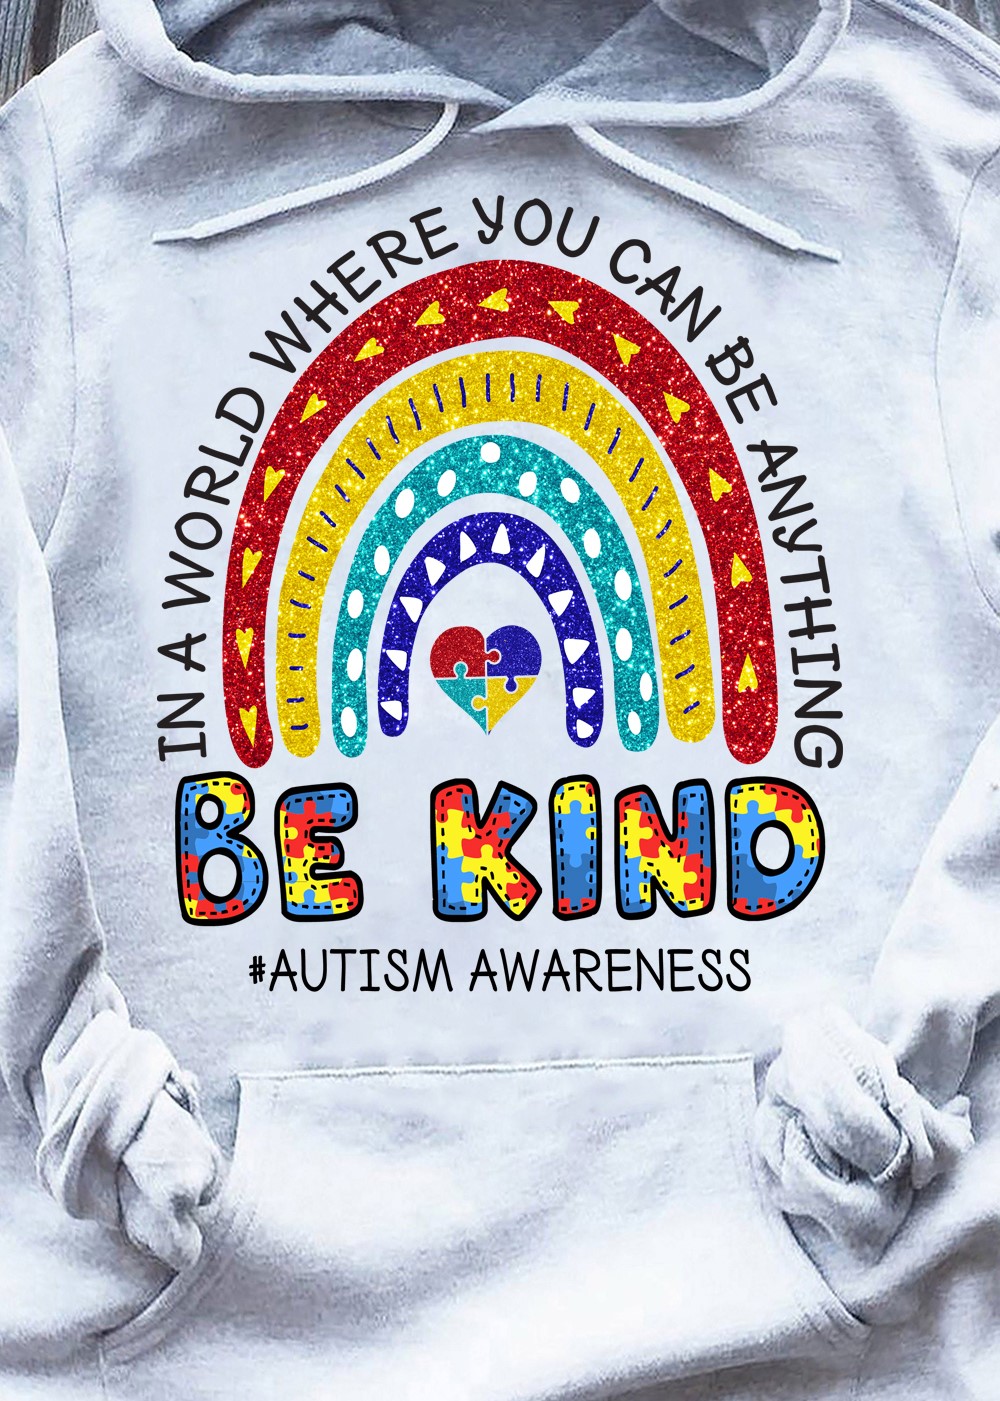 In a world where you can be anything be kind - Autism Awareness